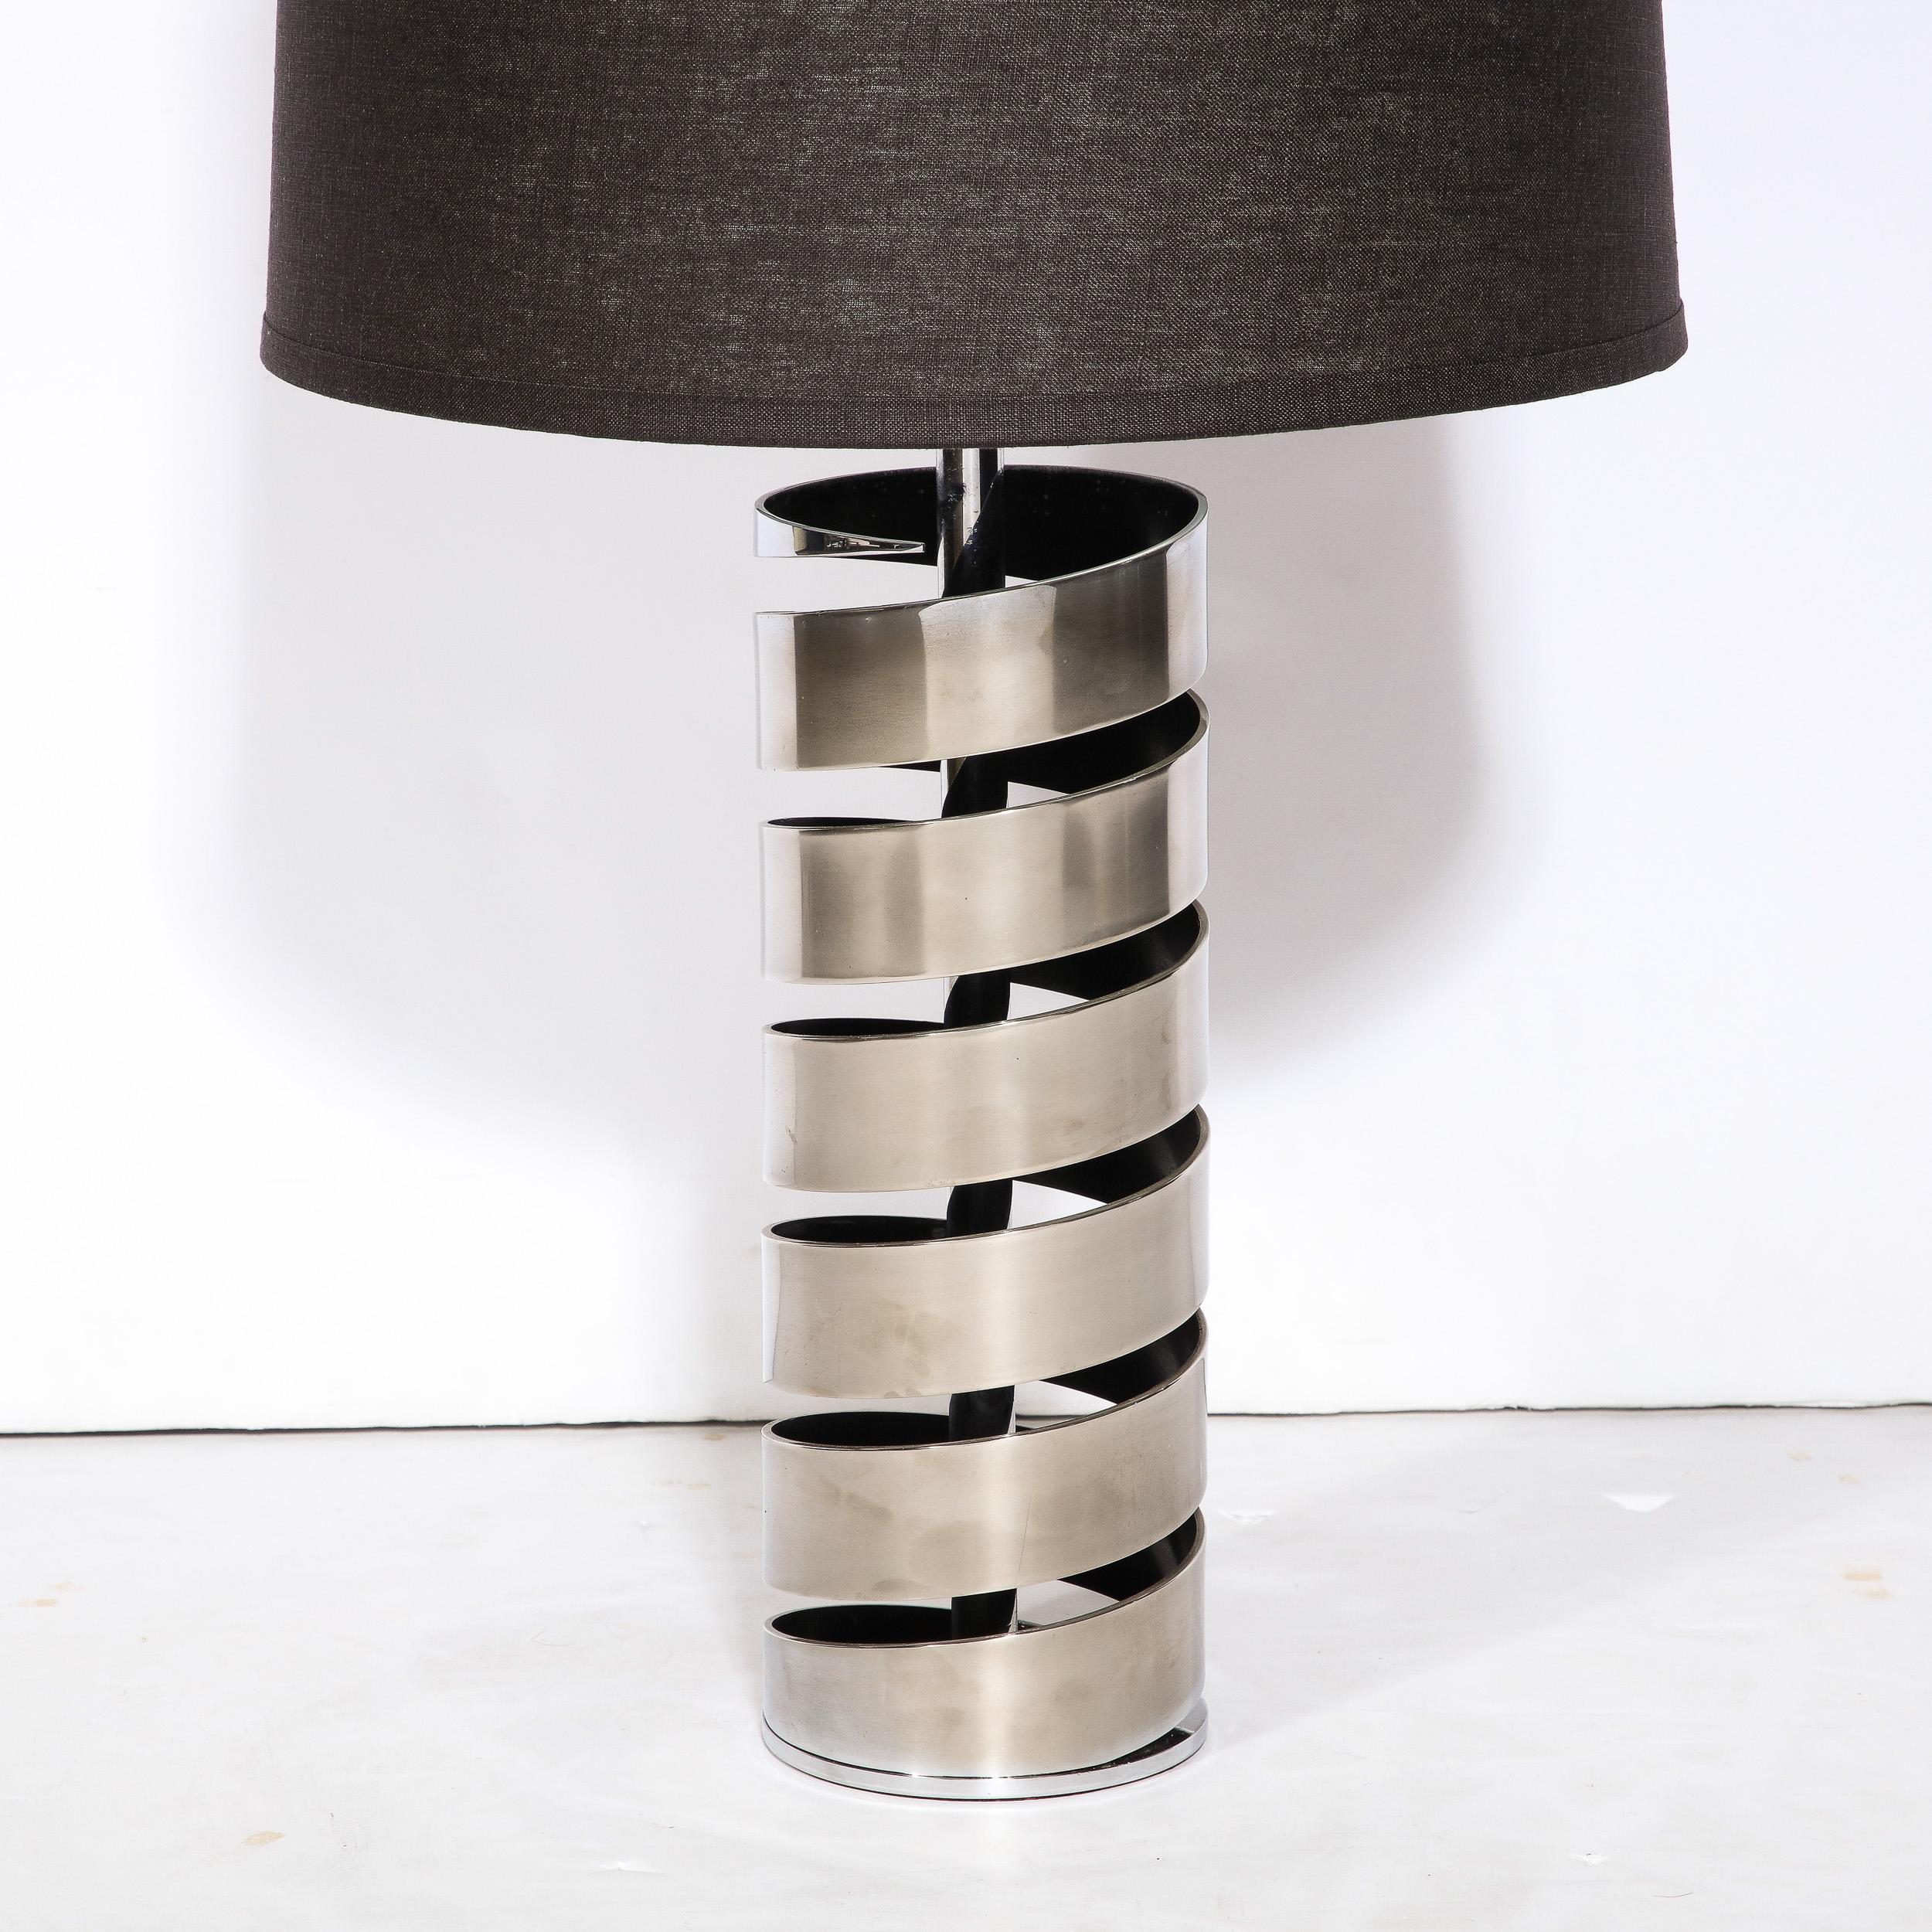 20th Century Modernist Torqued Spiral Form Table Lamp in Satin Nickel For Sale